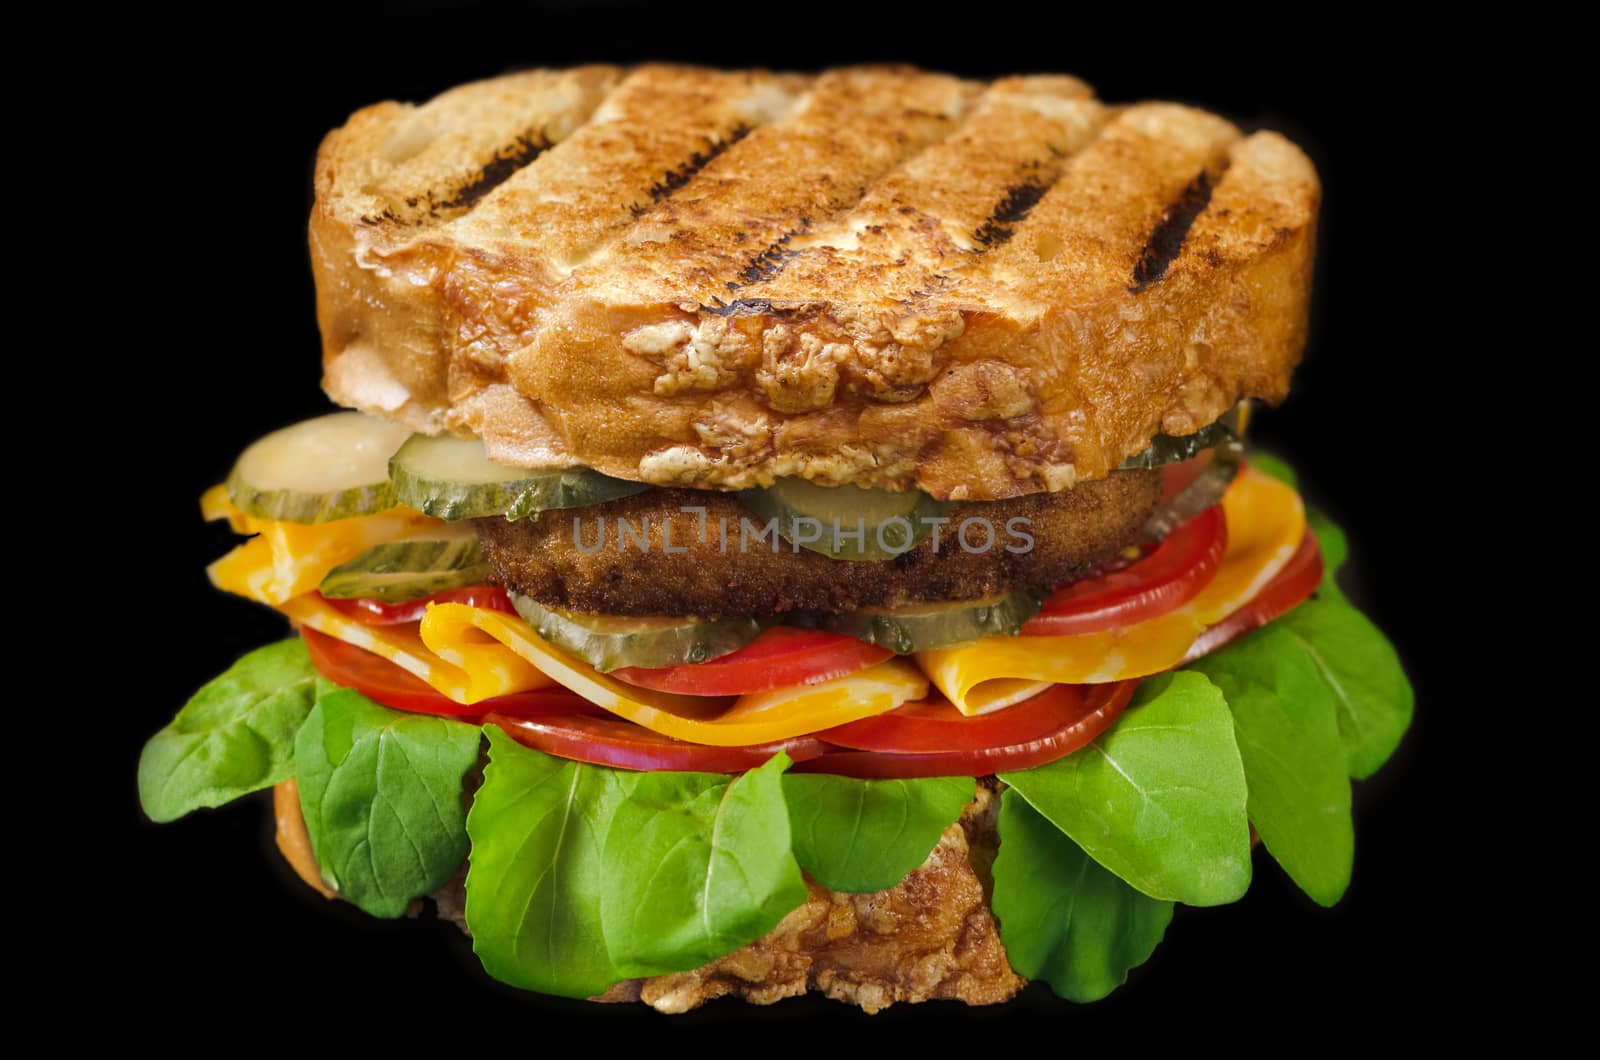 Big sandwich with cutlet, cheese, tomatoes, cucumbers and greens. On a black background.